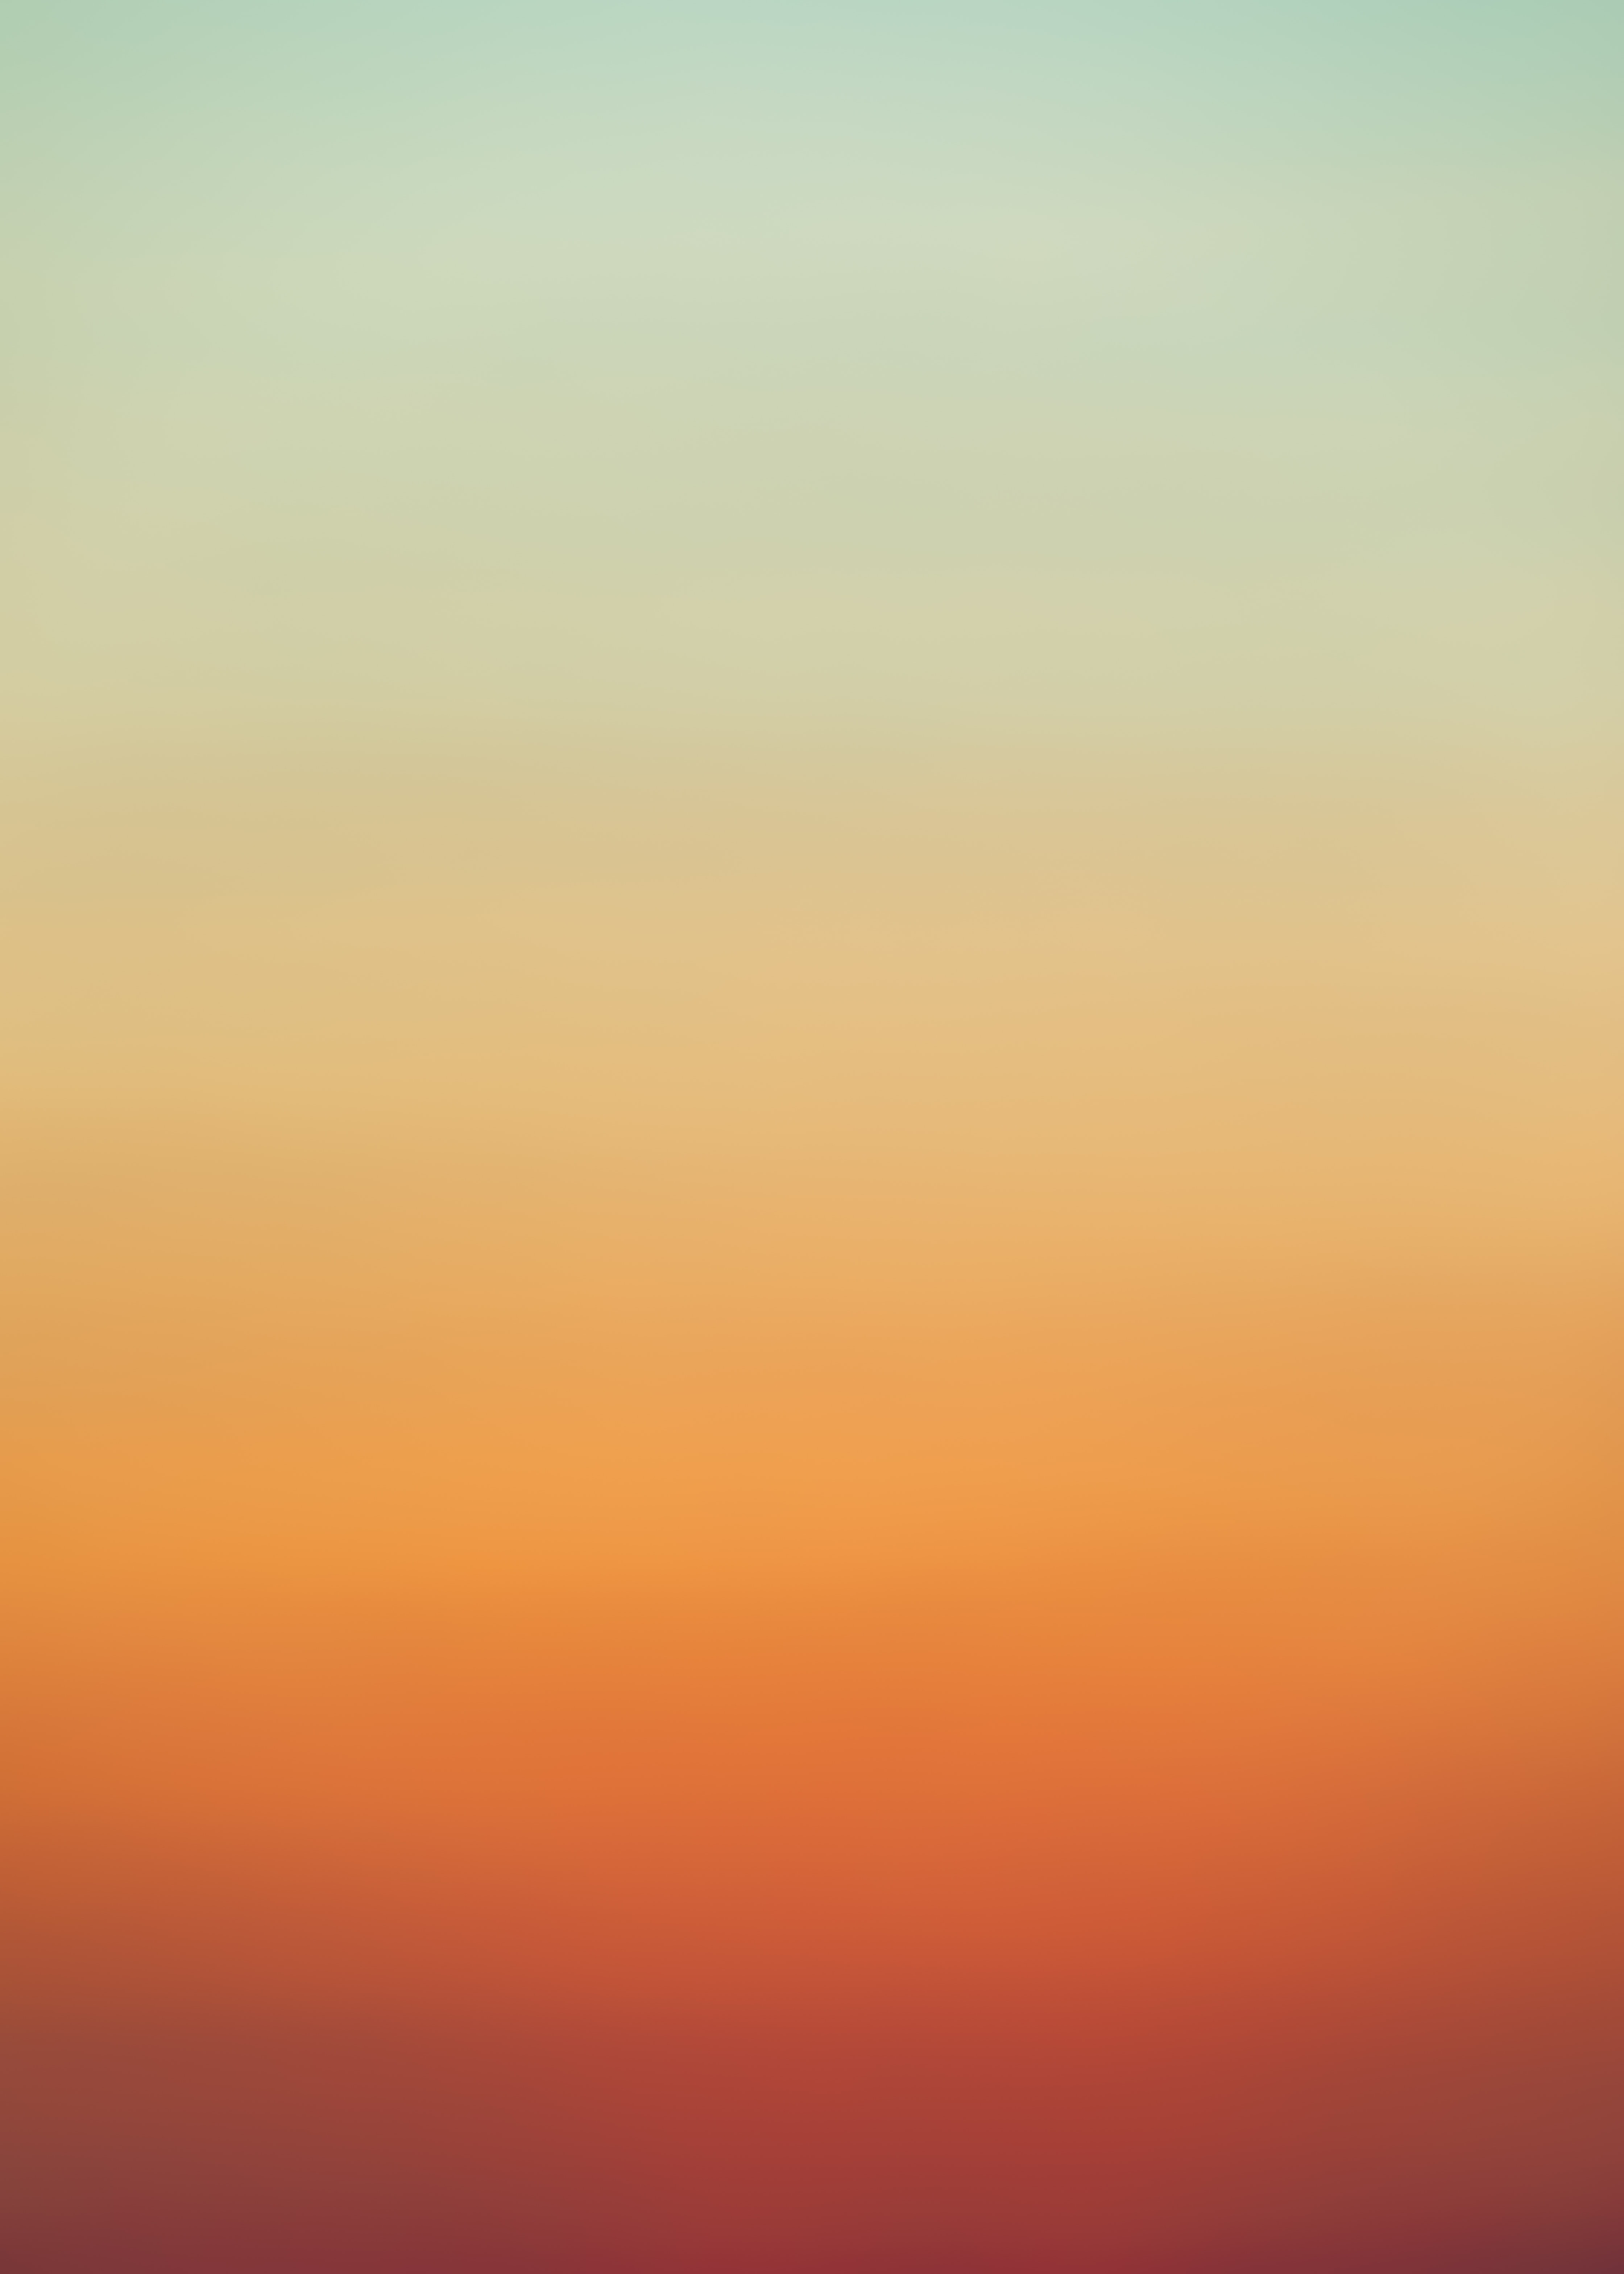 gradient, color, background, abstract, yellow, orange